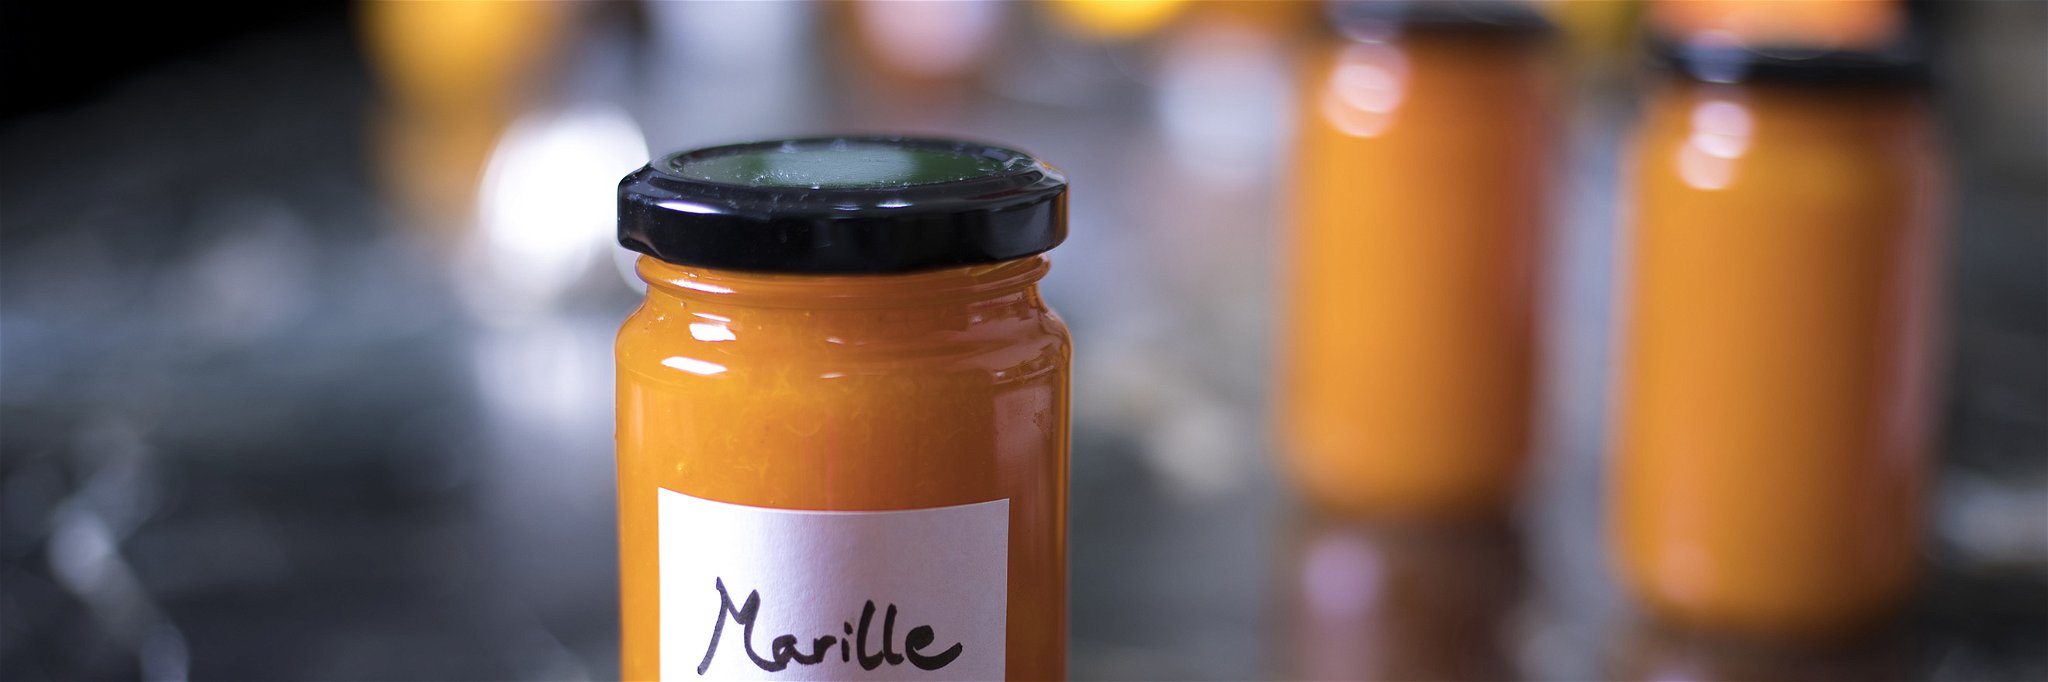 Apricot (Marille in German) Jam